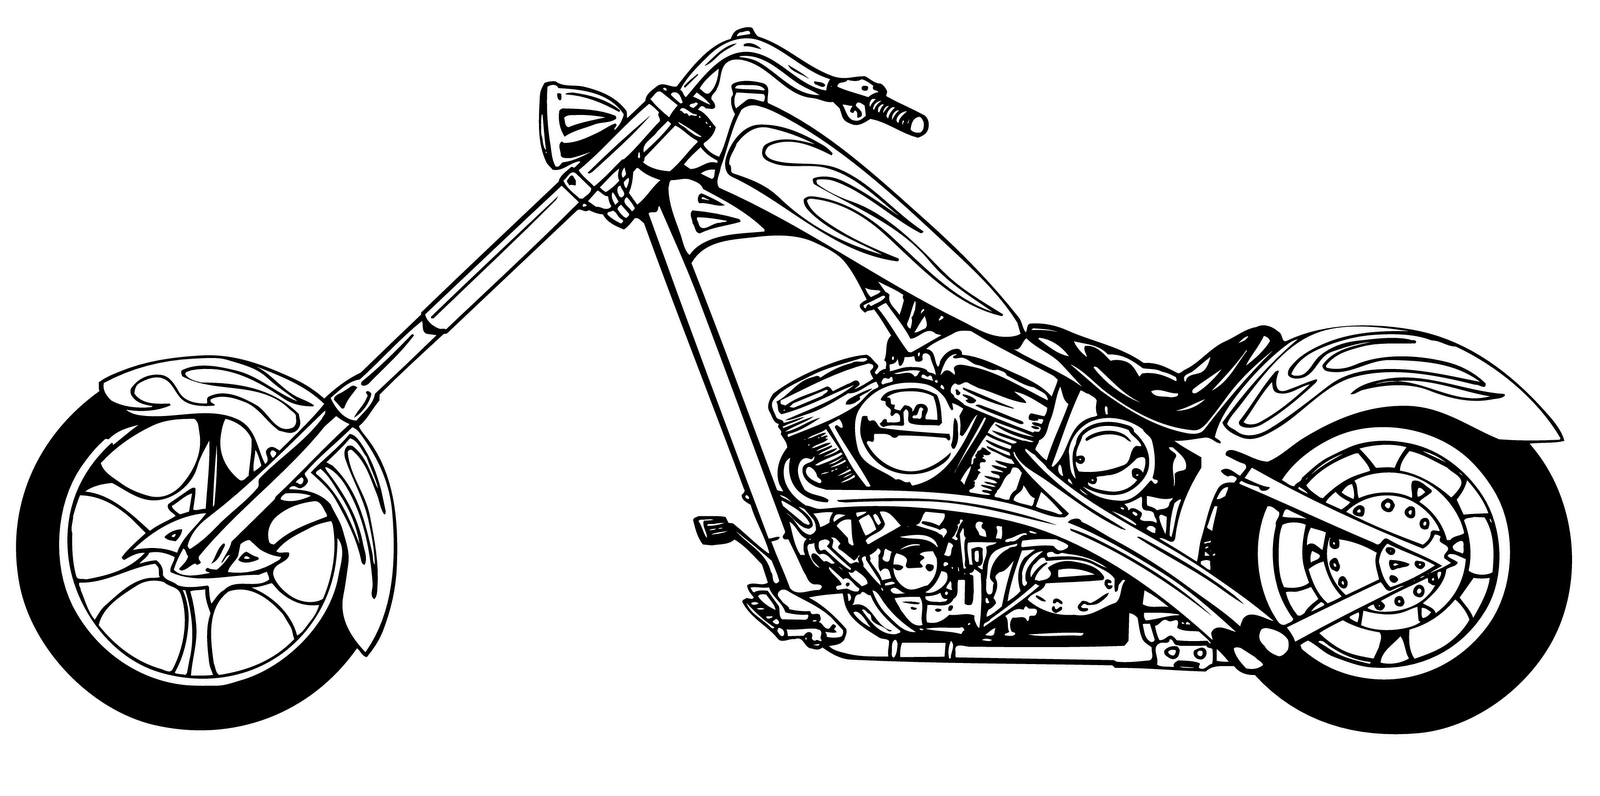 Harley davidson harley motorcycle black and white clipart 2